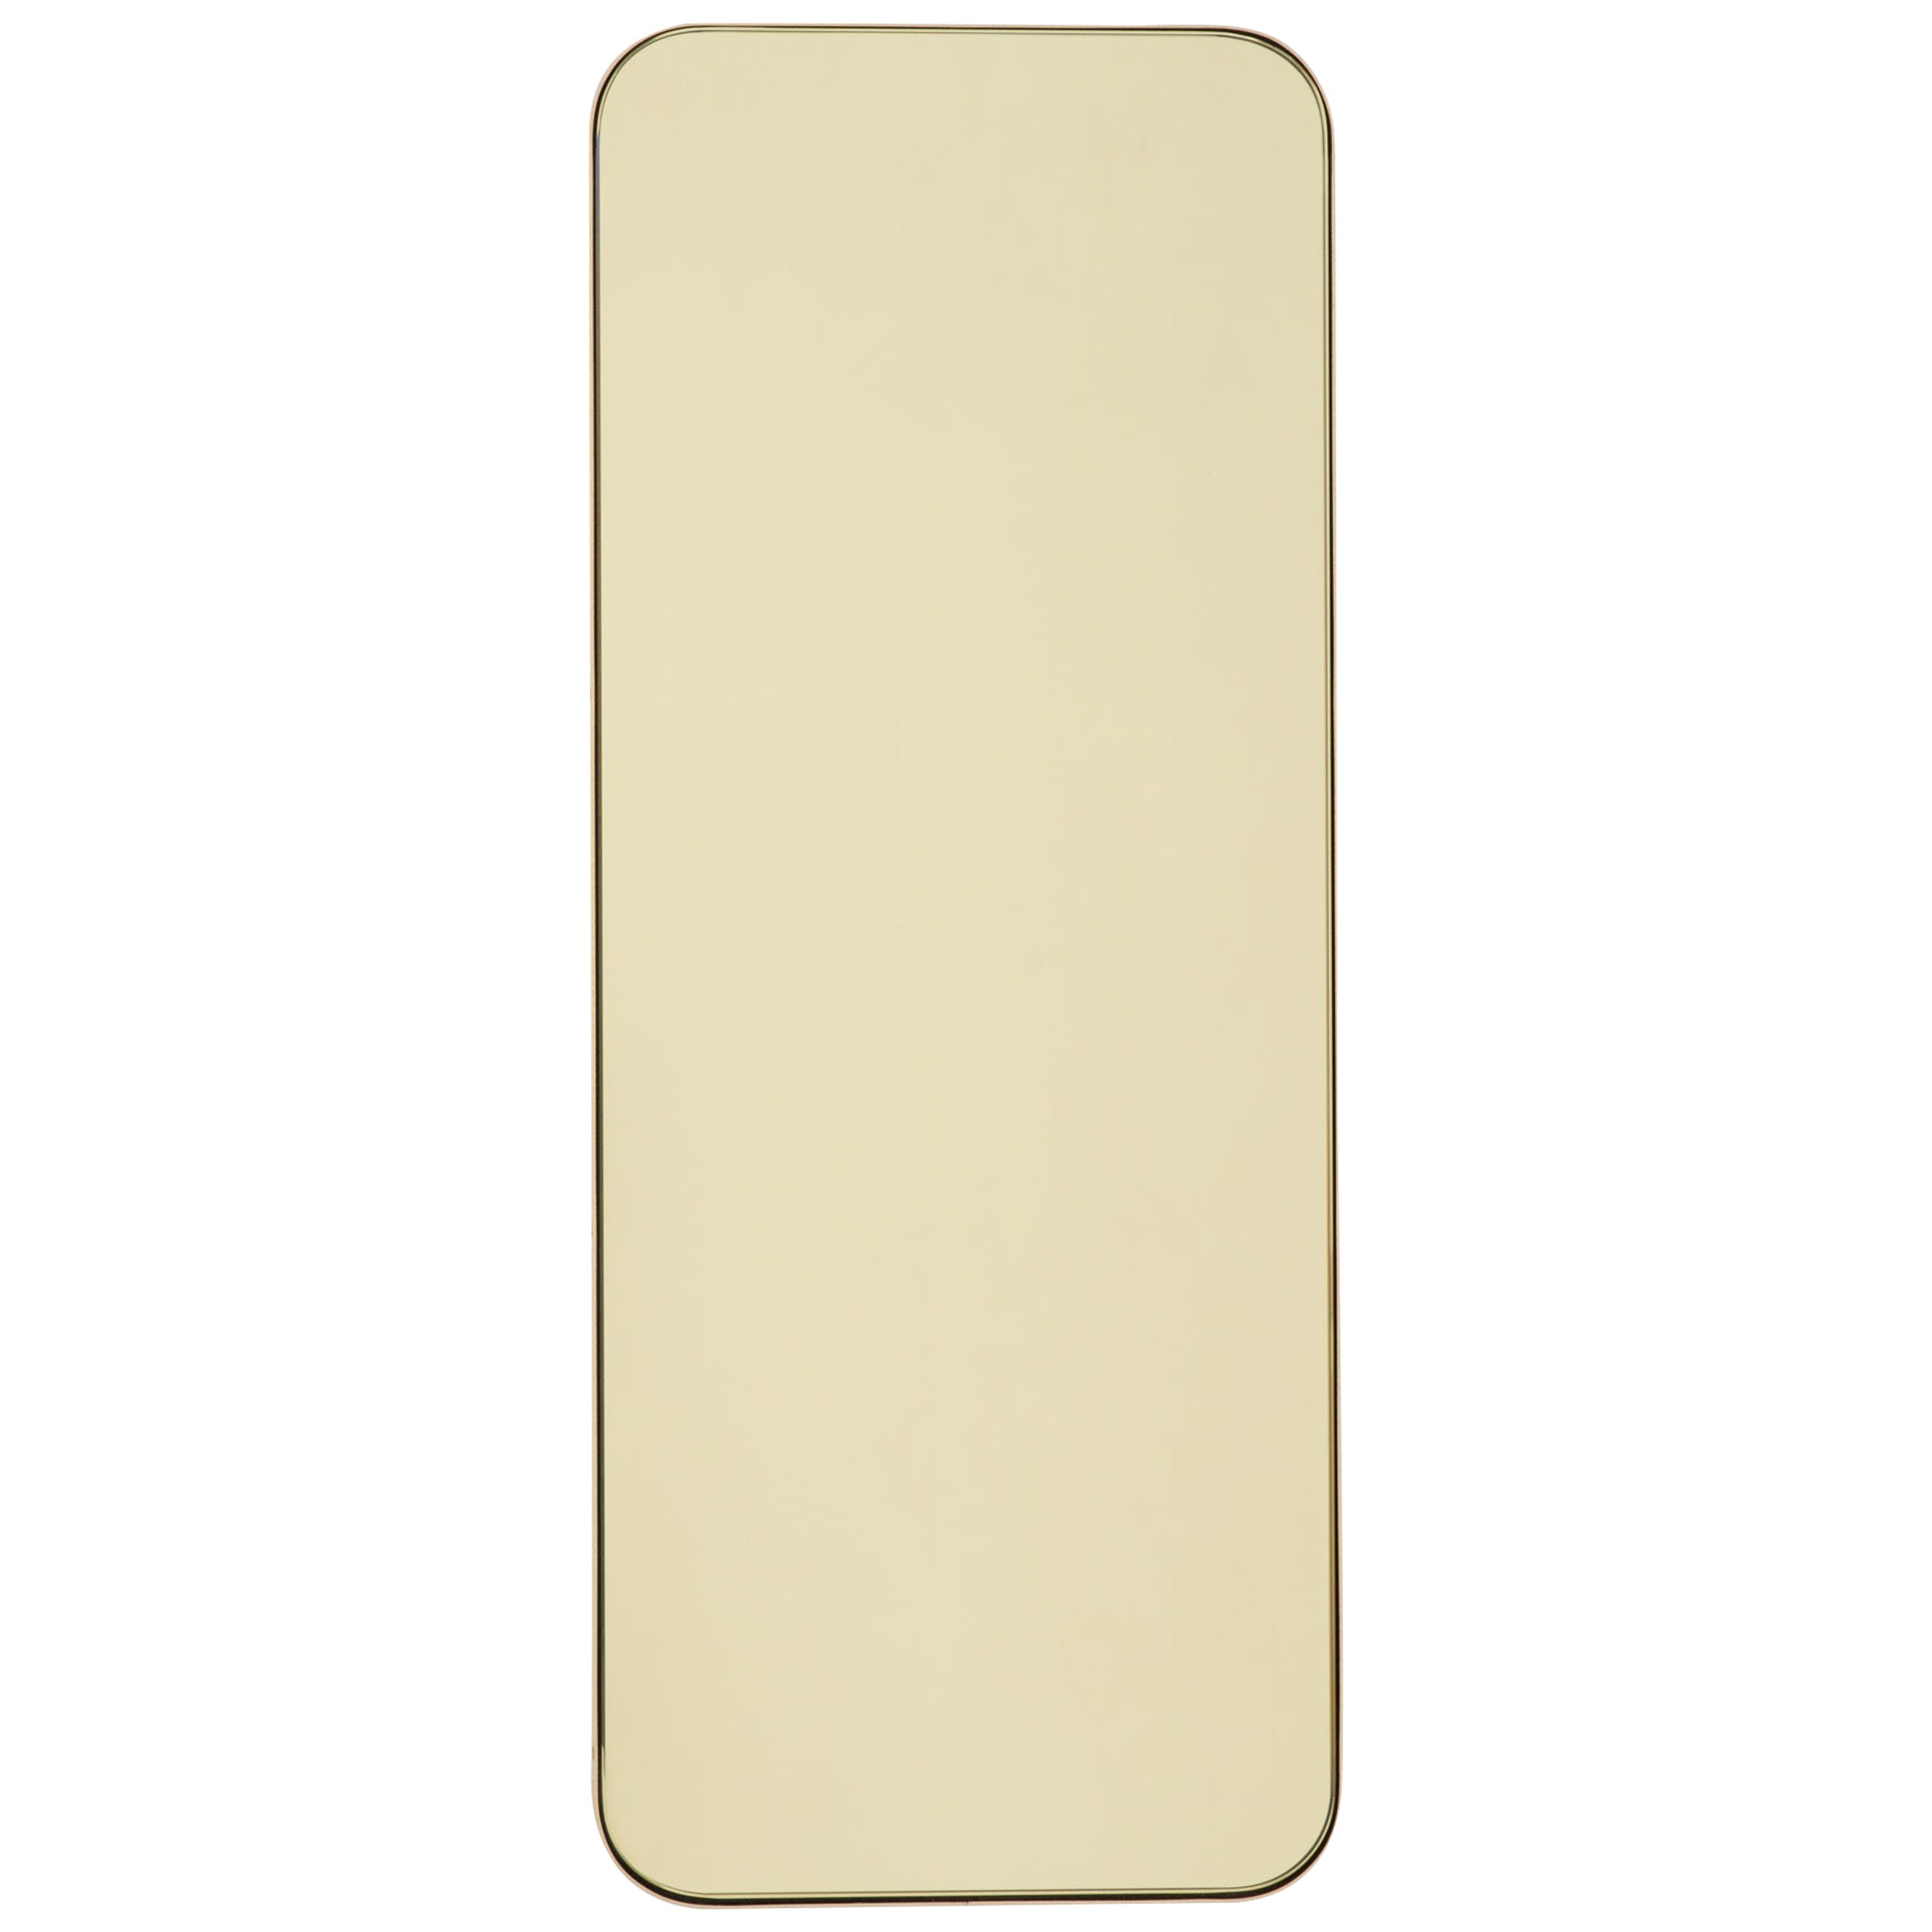 Quadris Gold Tinted Rectangular Modern Mirror with a Brass Frame, Large For Sale